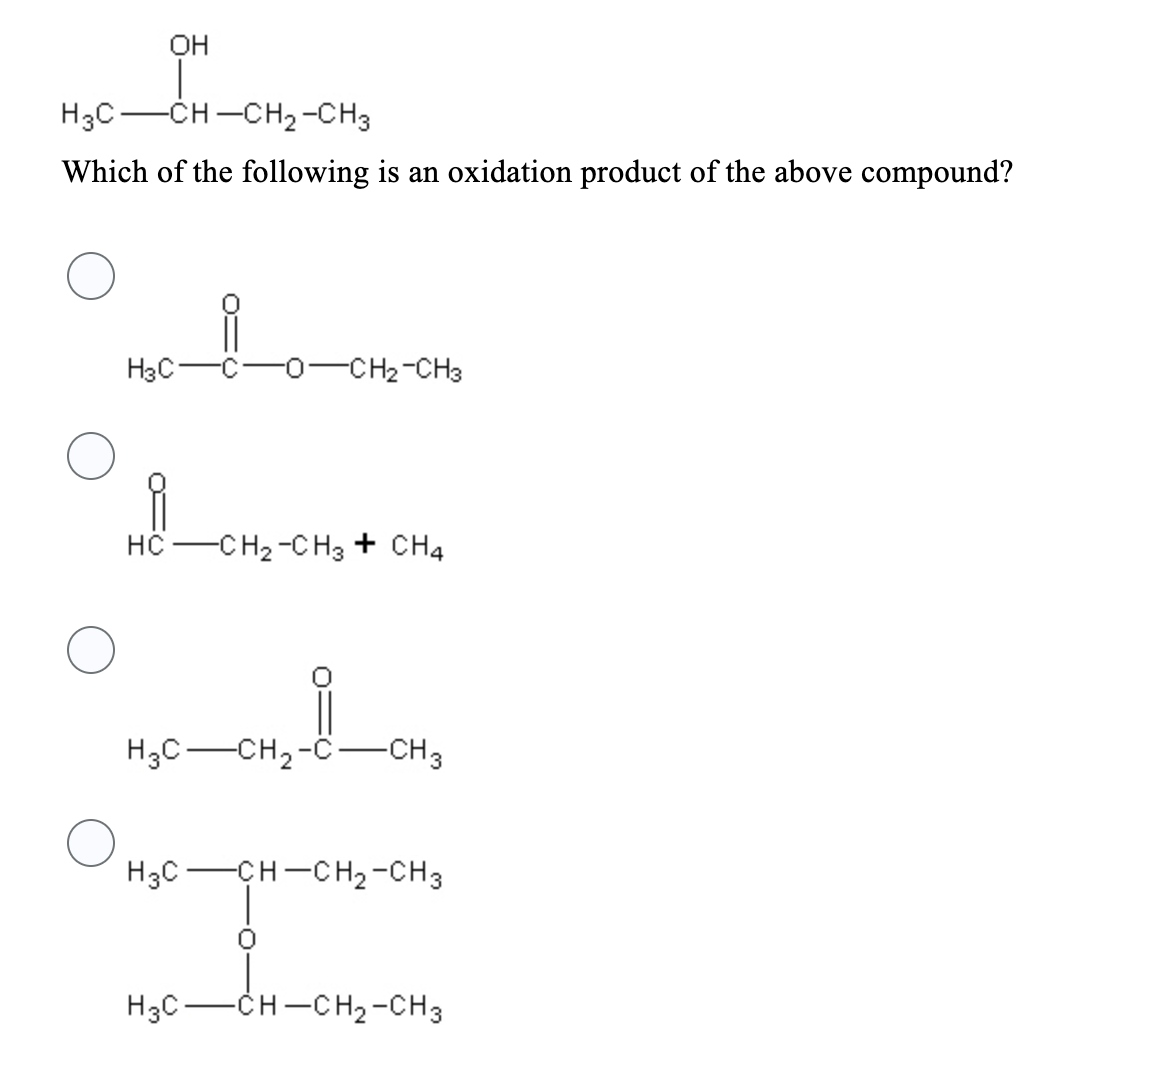 OH
|
H3C-CH-CH₂-CH3
Which of the following is an oxidation product of the above compound?
H3C-
-0-CH₂-CH3
i
HC-CH₂-CH3 + CH4
i
H3C-CH₂-C-CH3
H3C-CH-CH₂-CH3
H3C-
-CH-CH₂-CH3